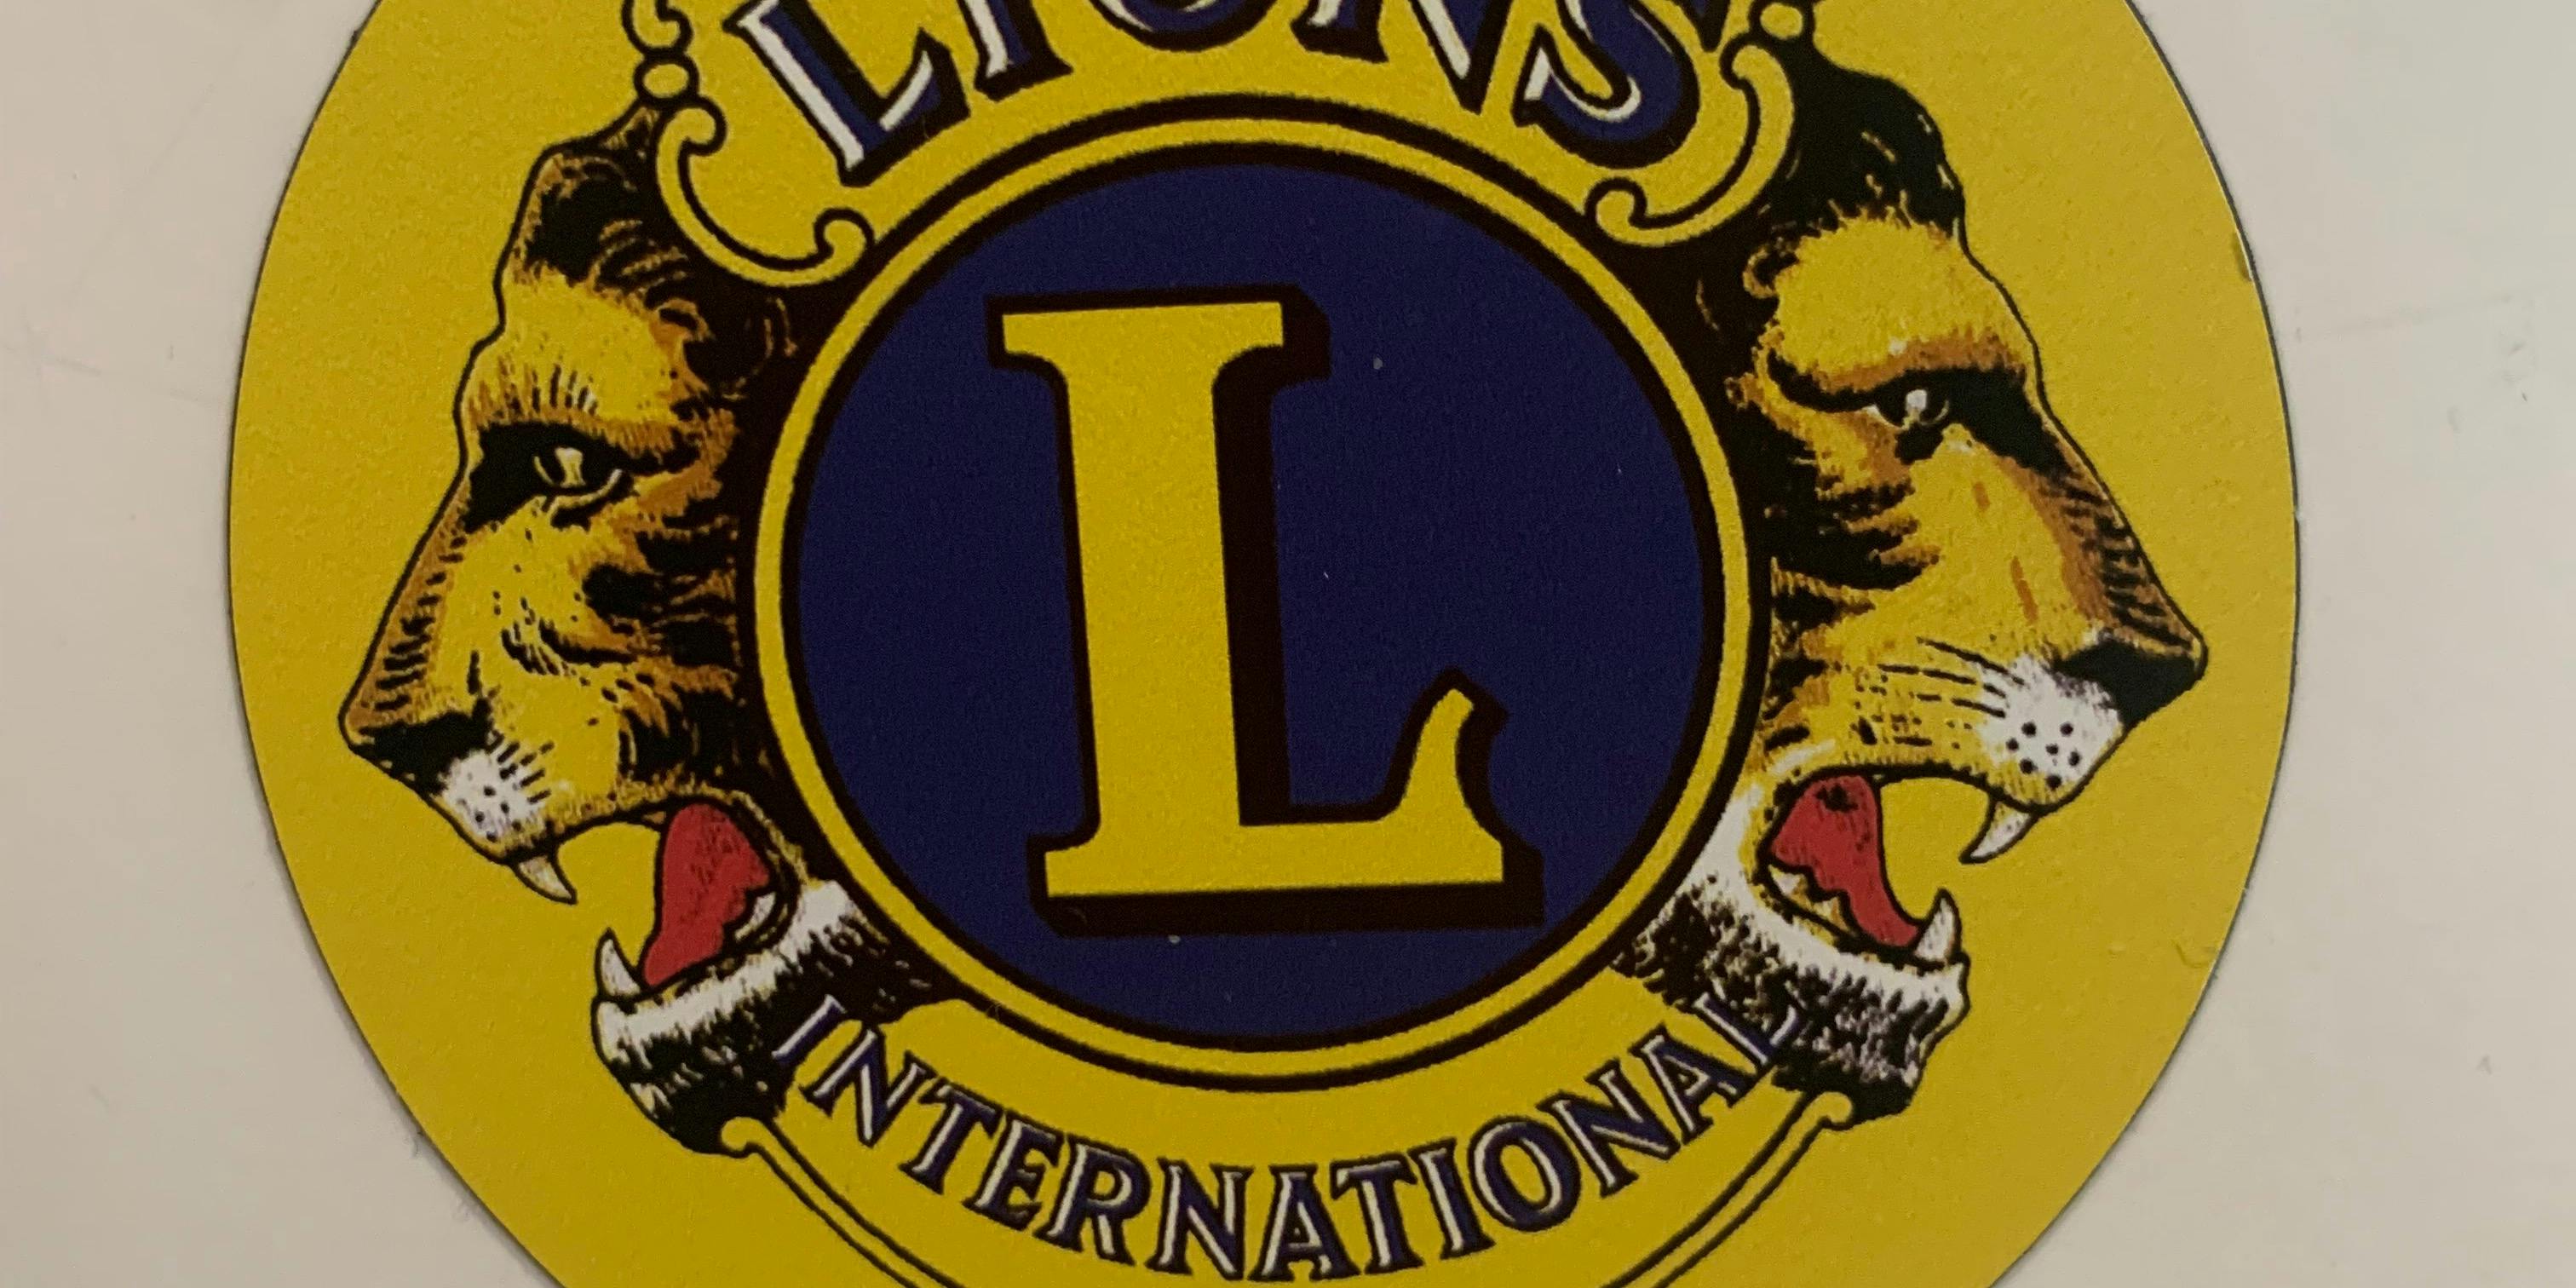 Northport Lions Club Potluck Dinner w/ program - Guests and Prospects Welcome